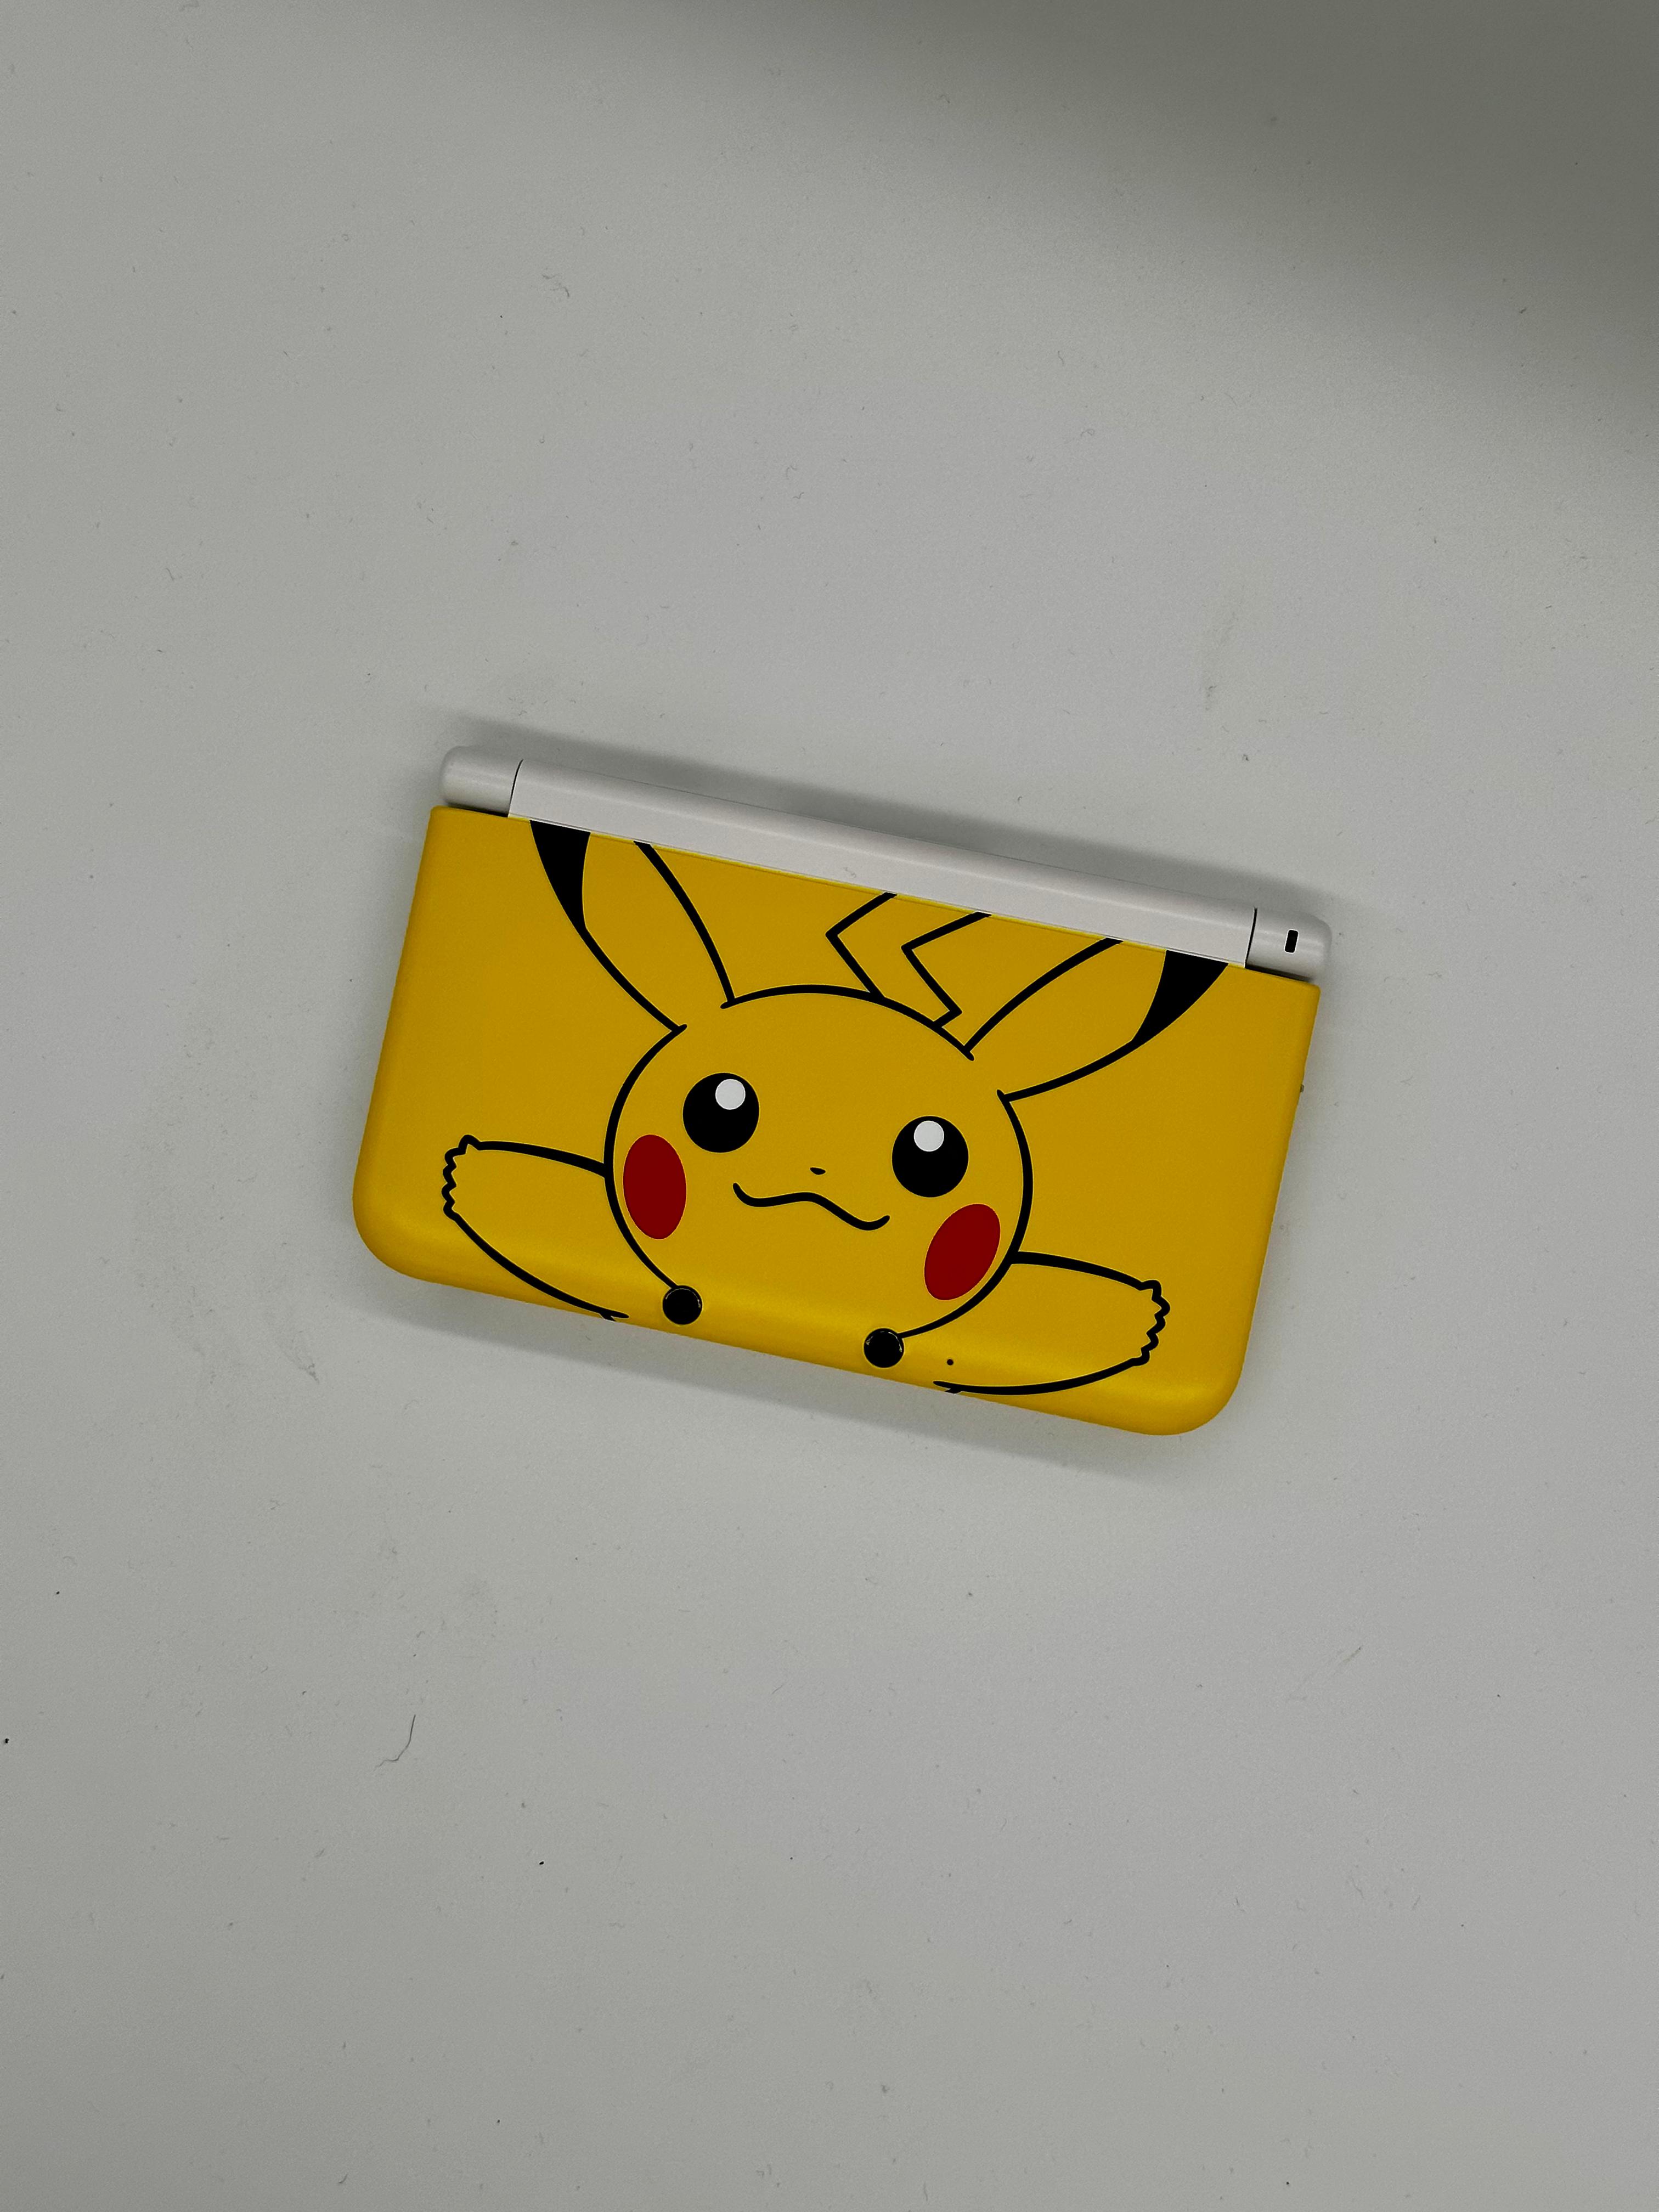 Nintendo Pokémon Pikachu Limited Edition 3DS XL Handheld Console Modded with CFW